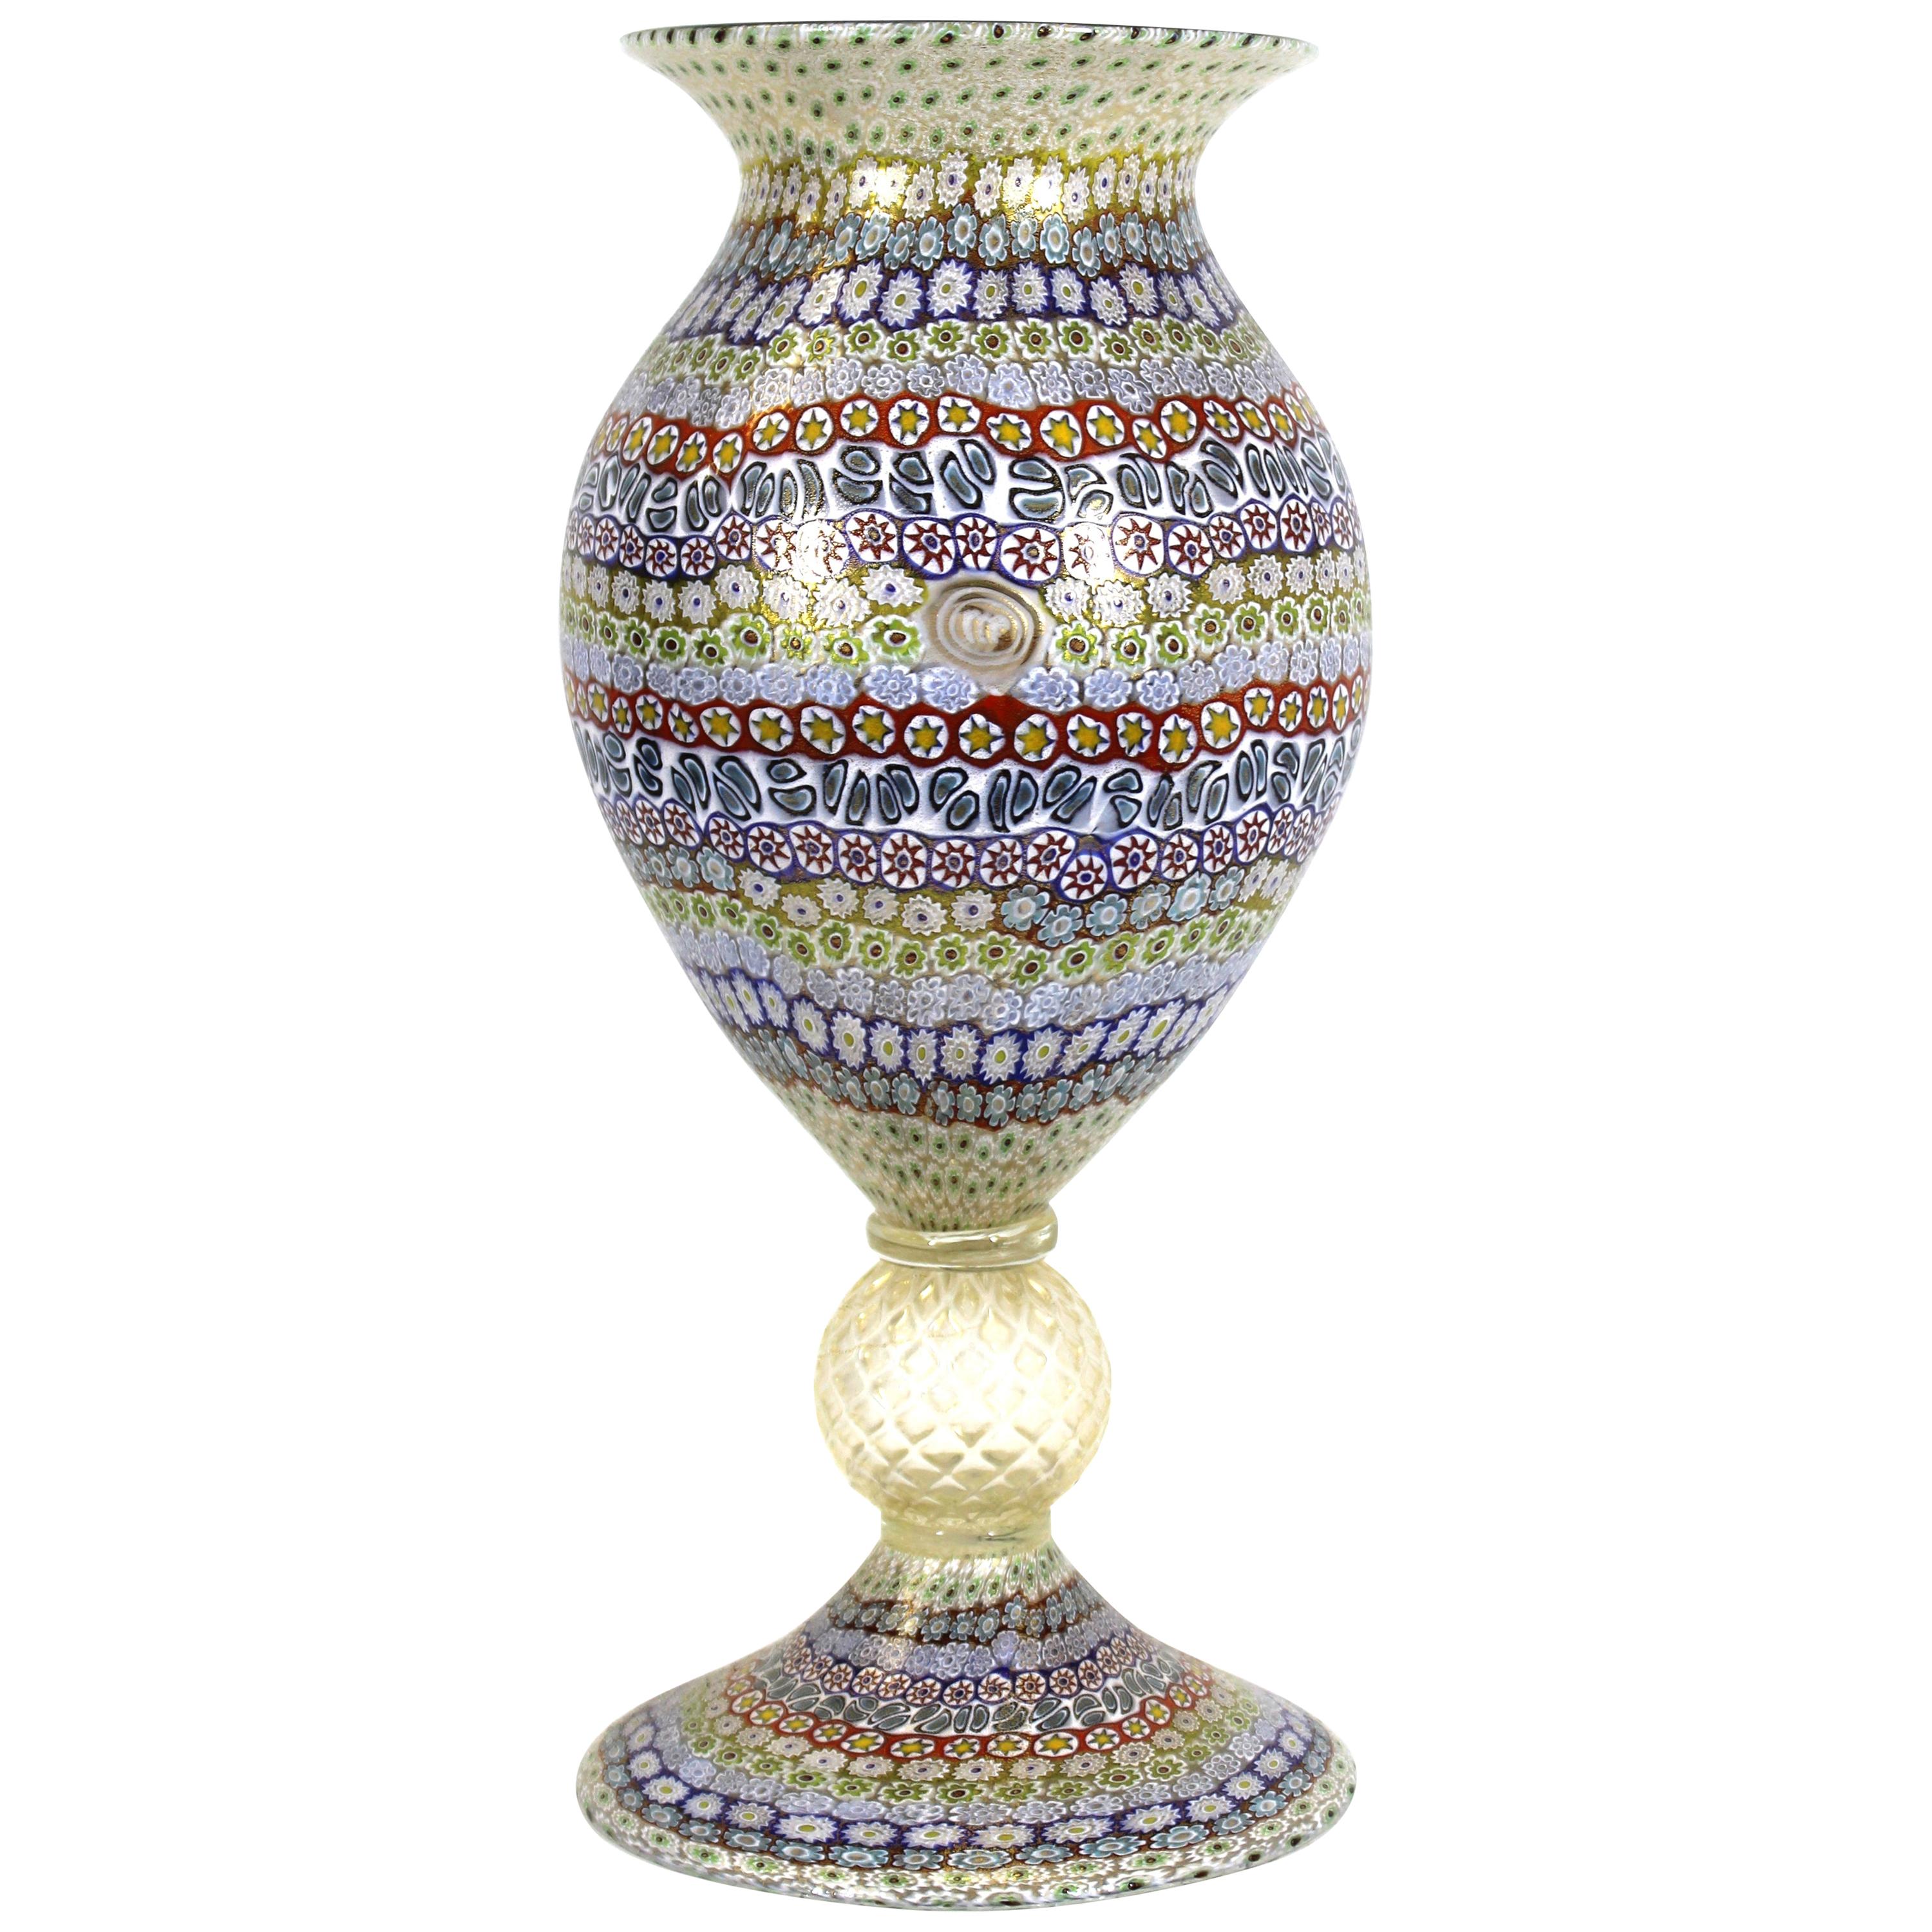 How is millefiori glass made?